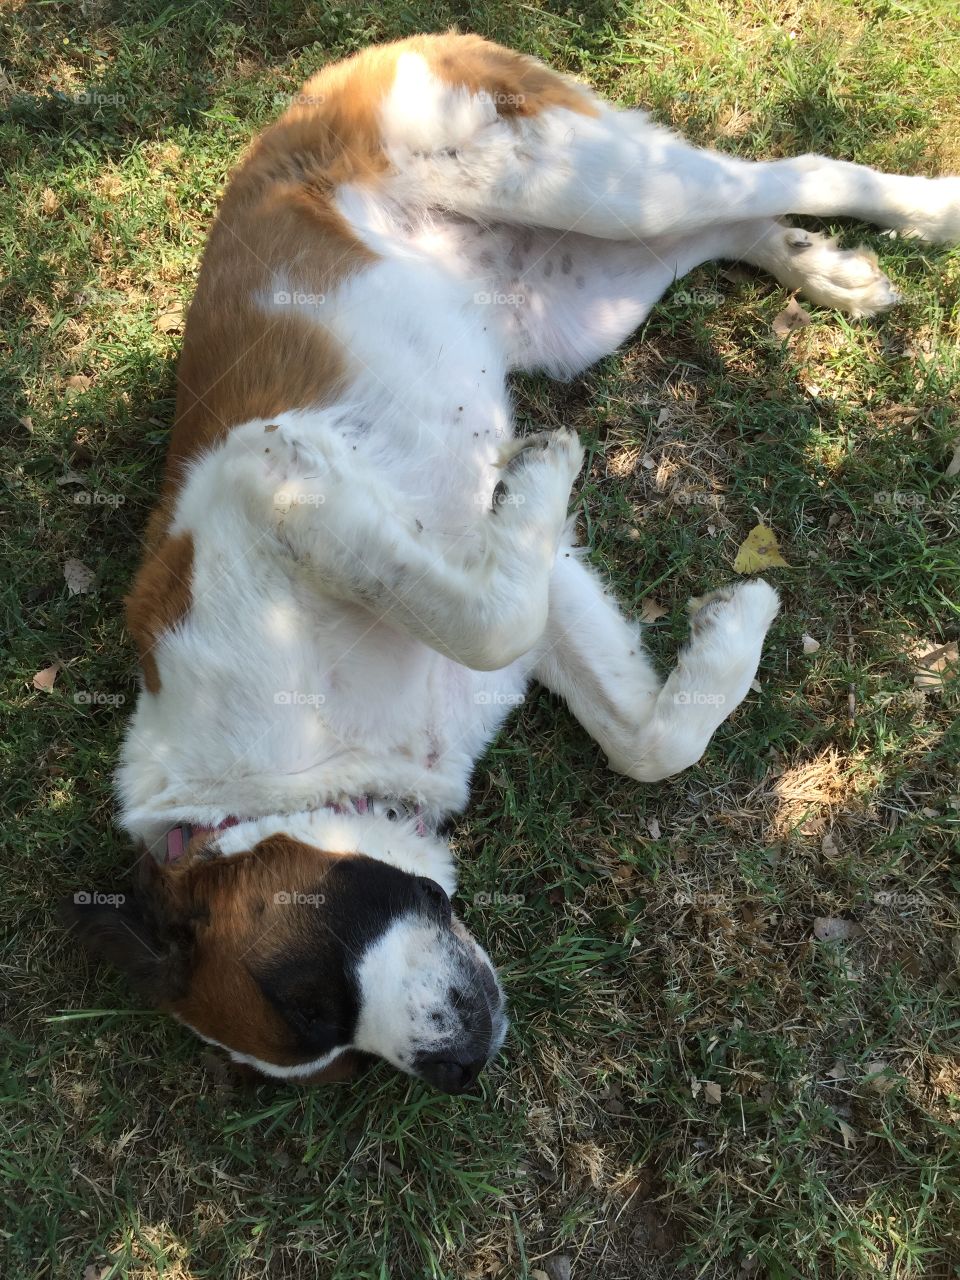 Topanga loves to roll in the grass. Surely that's common among St Bernards 😉